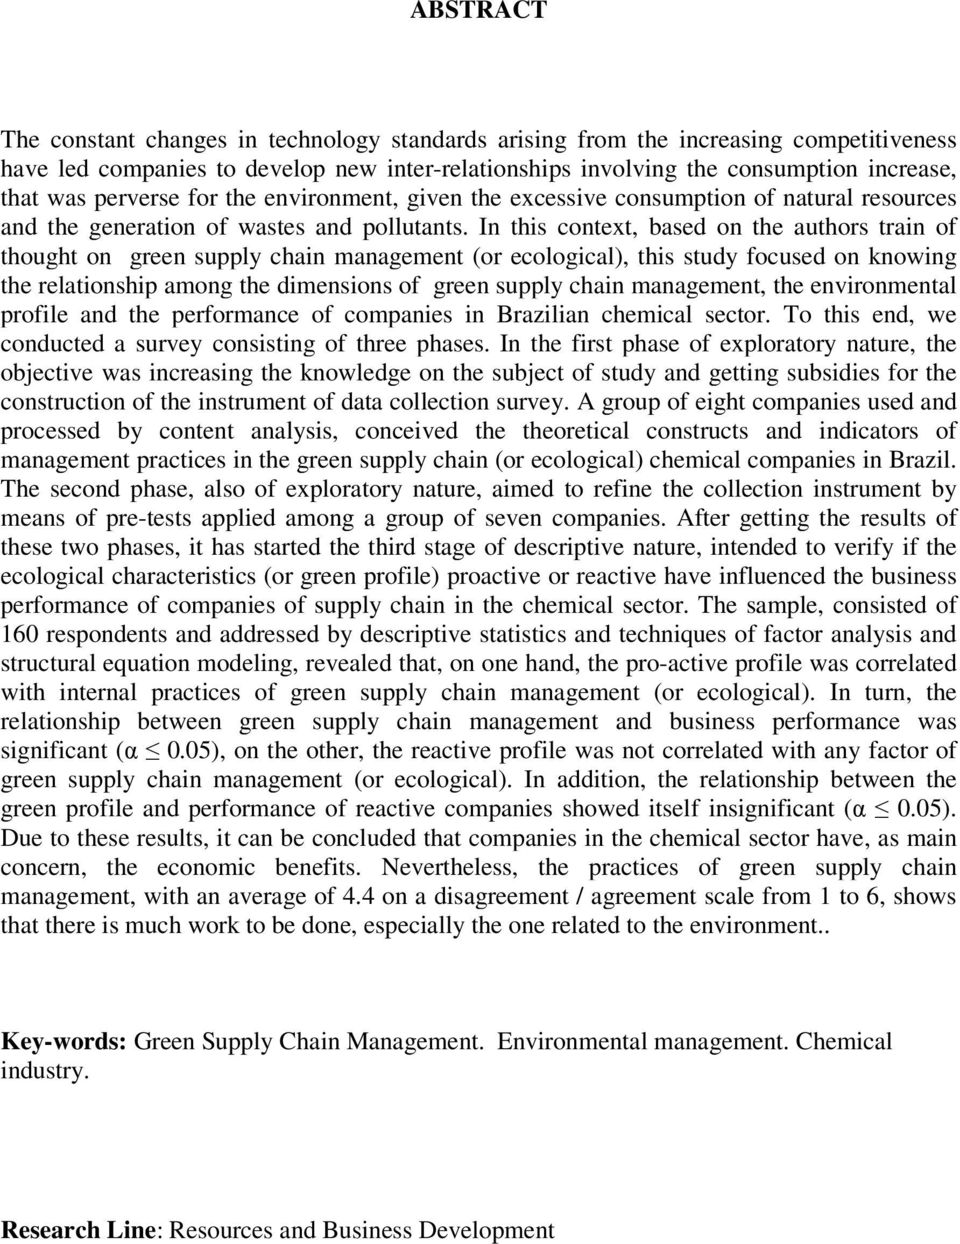 In this context, based on the authors train of thought on green supply chain management (or ecological), this study focused on knowing the relationship among the dimensions of green supply chain